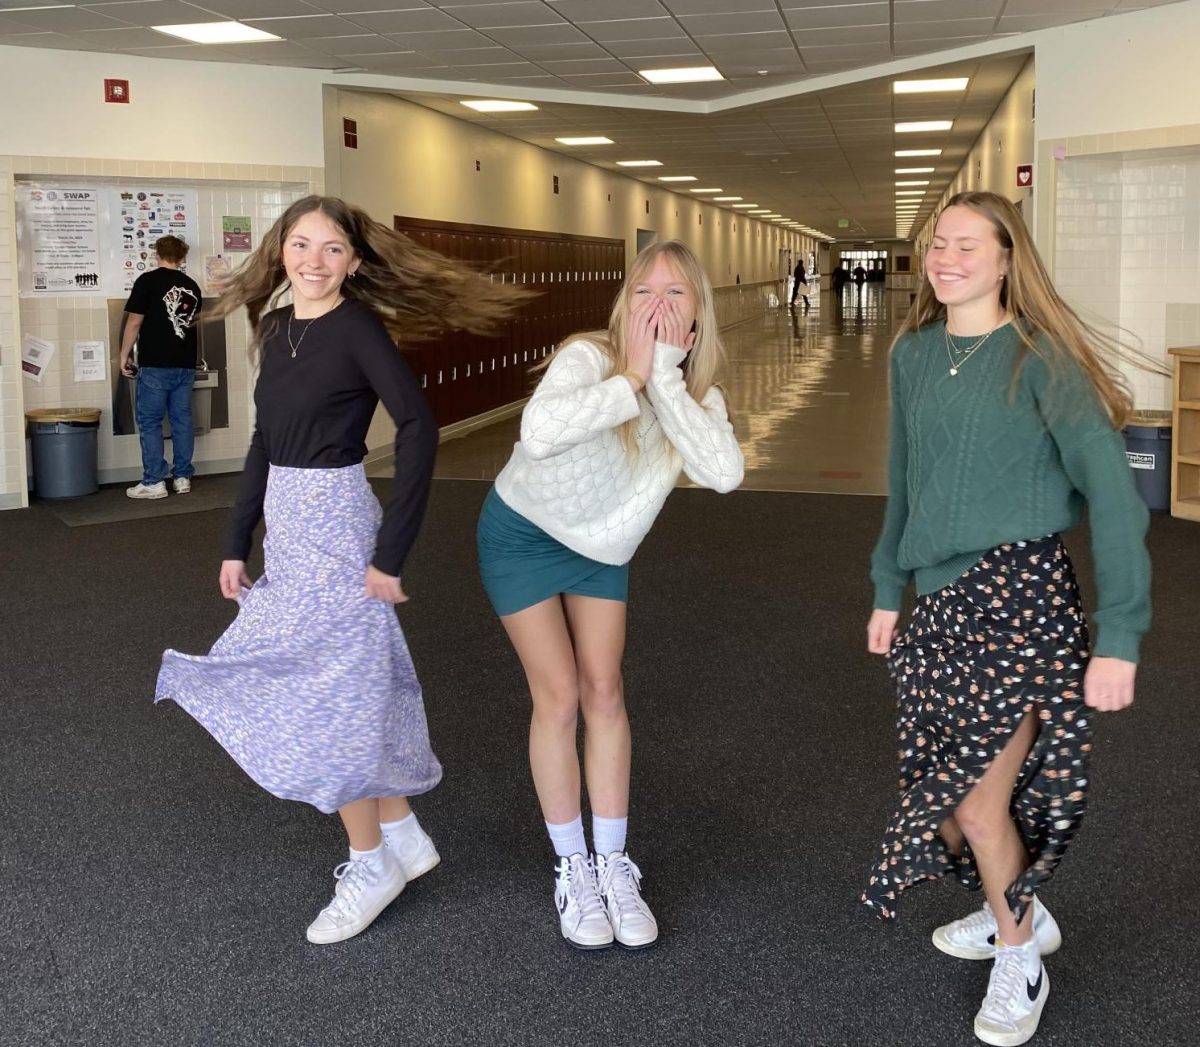 Students+excited%2C+twirling+into+spring+break+%0APhoto+provided+by%3A+Emily+Hardin+%0A